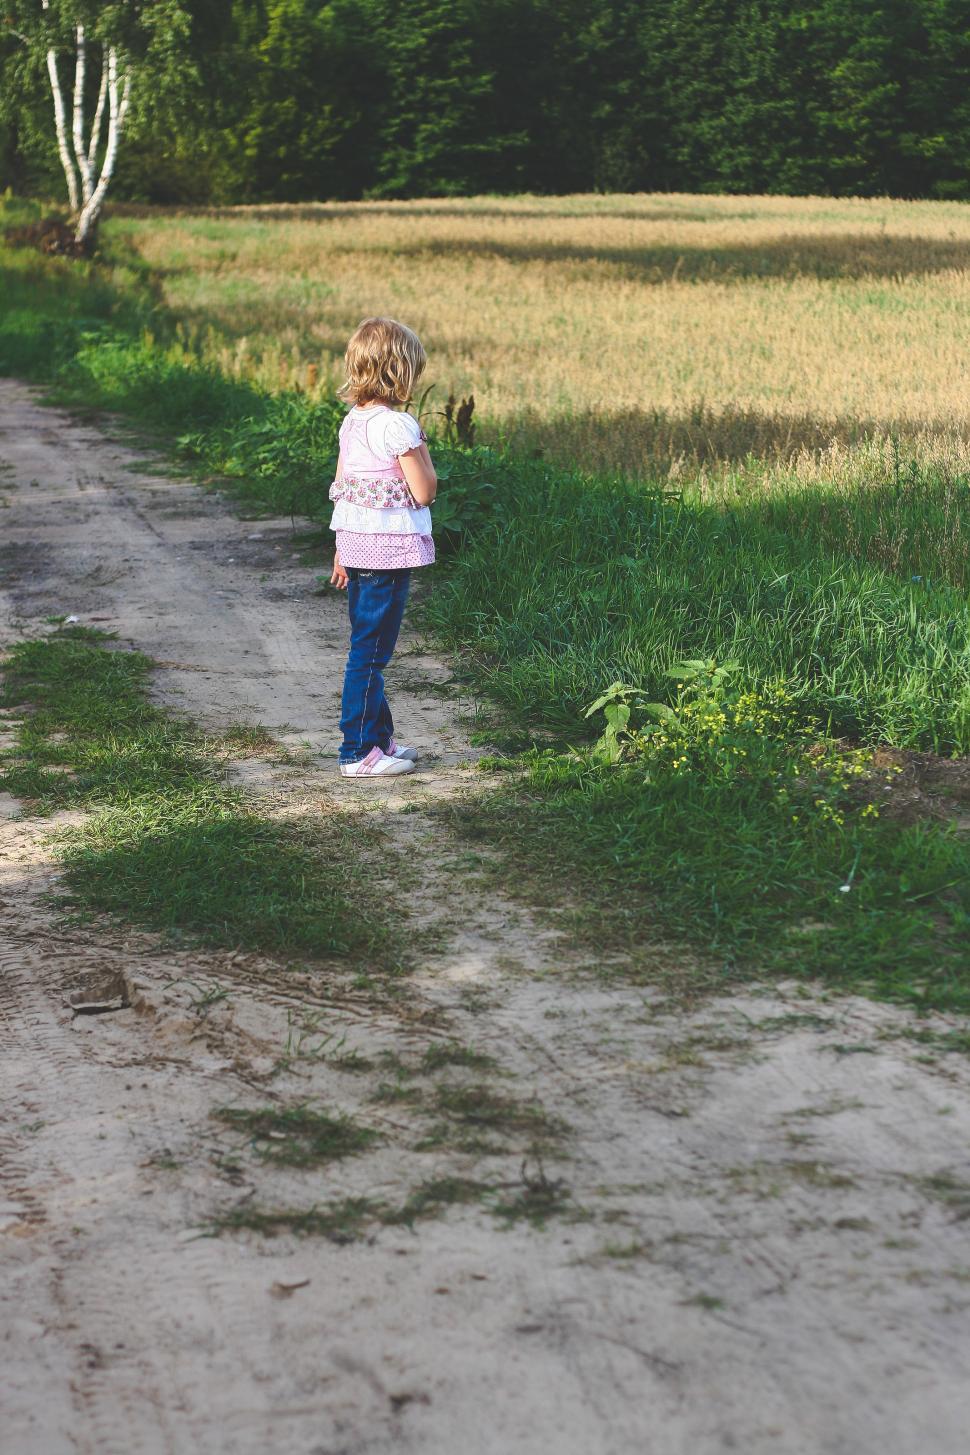 Free Image of A Little Girl Walking Down a Dirt Road 